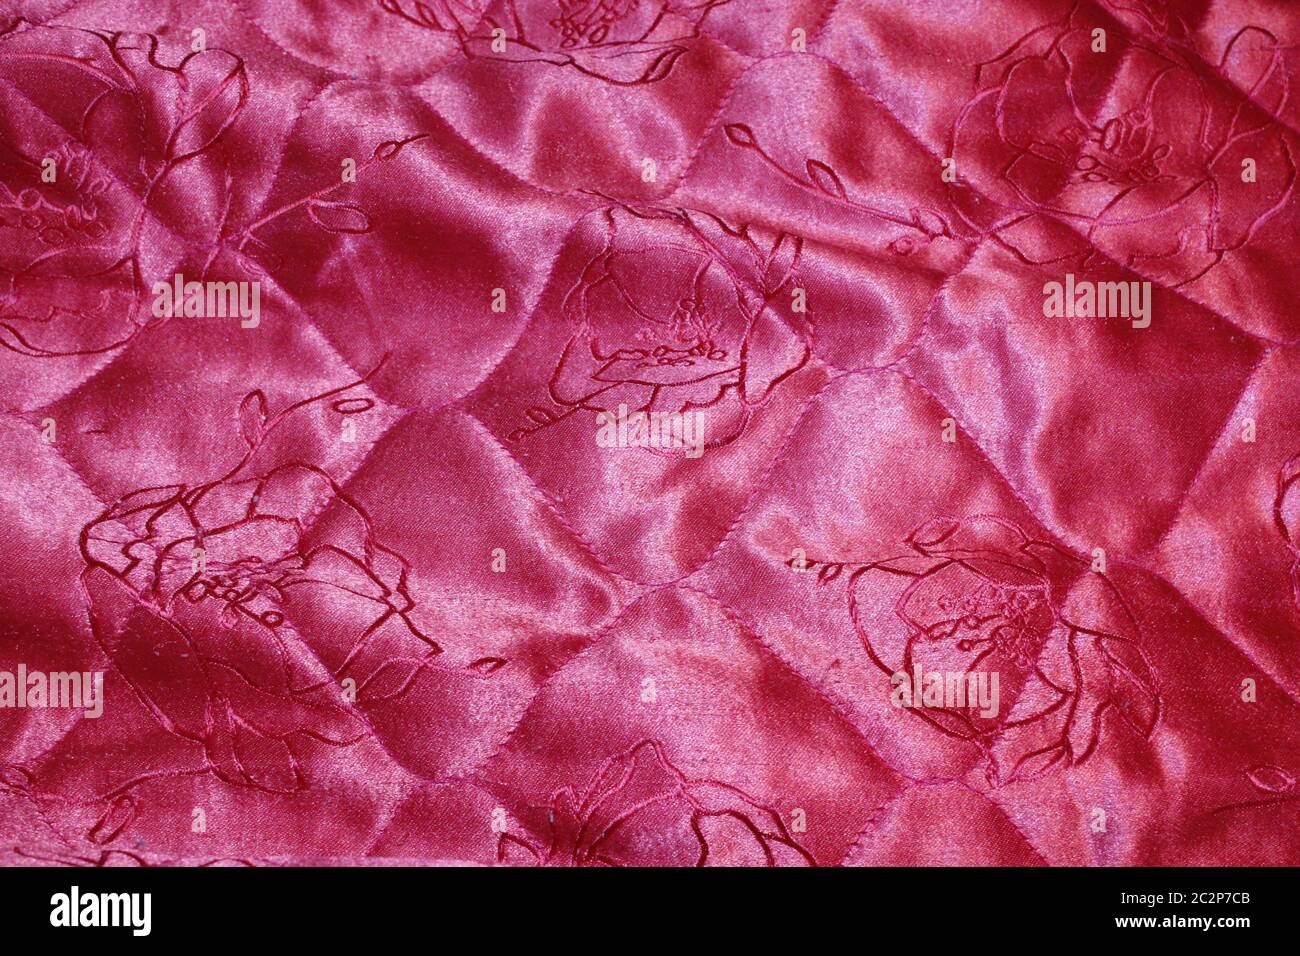 Texture on red coverlet with a pattern. Fabric texture. Red cloth background Stock Photo